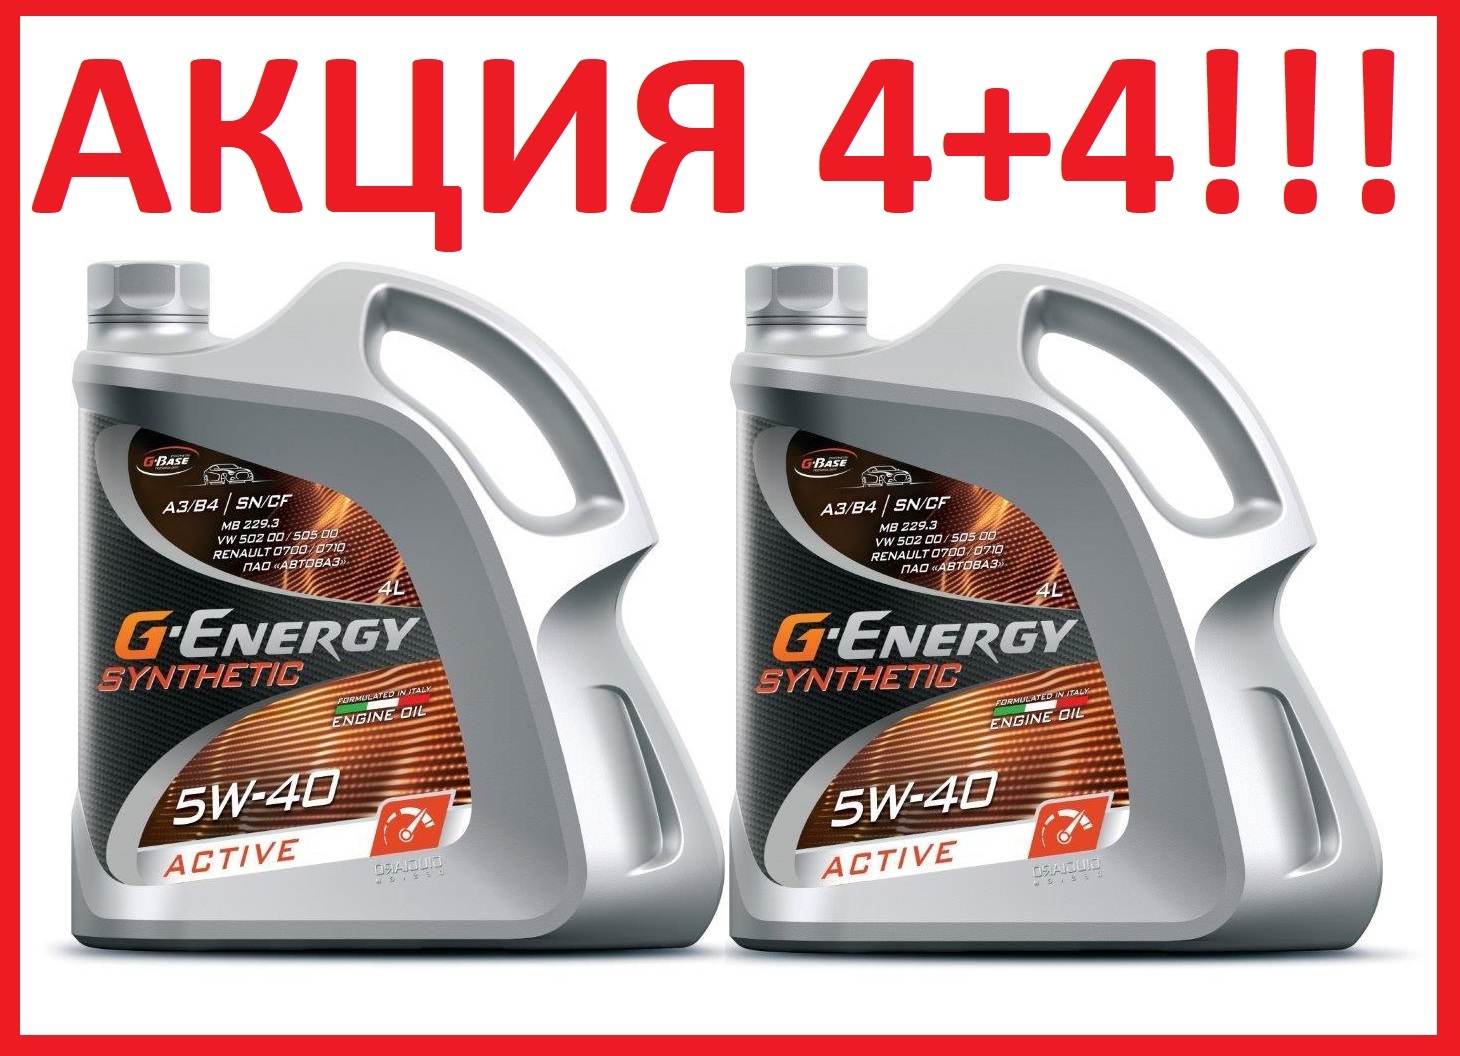 Масло моторное 5w40 synthetic g energy. G Energy 5w40 Active. G-Energy Synthetic Active 5w-40. 253142411 G-Energy Synthetic Active 5w-40 5l. G Energy Synthetic 5w40.